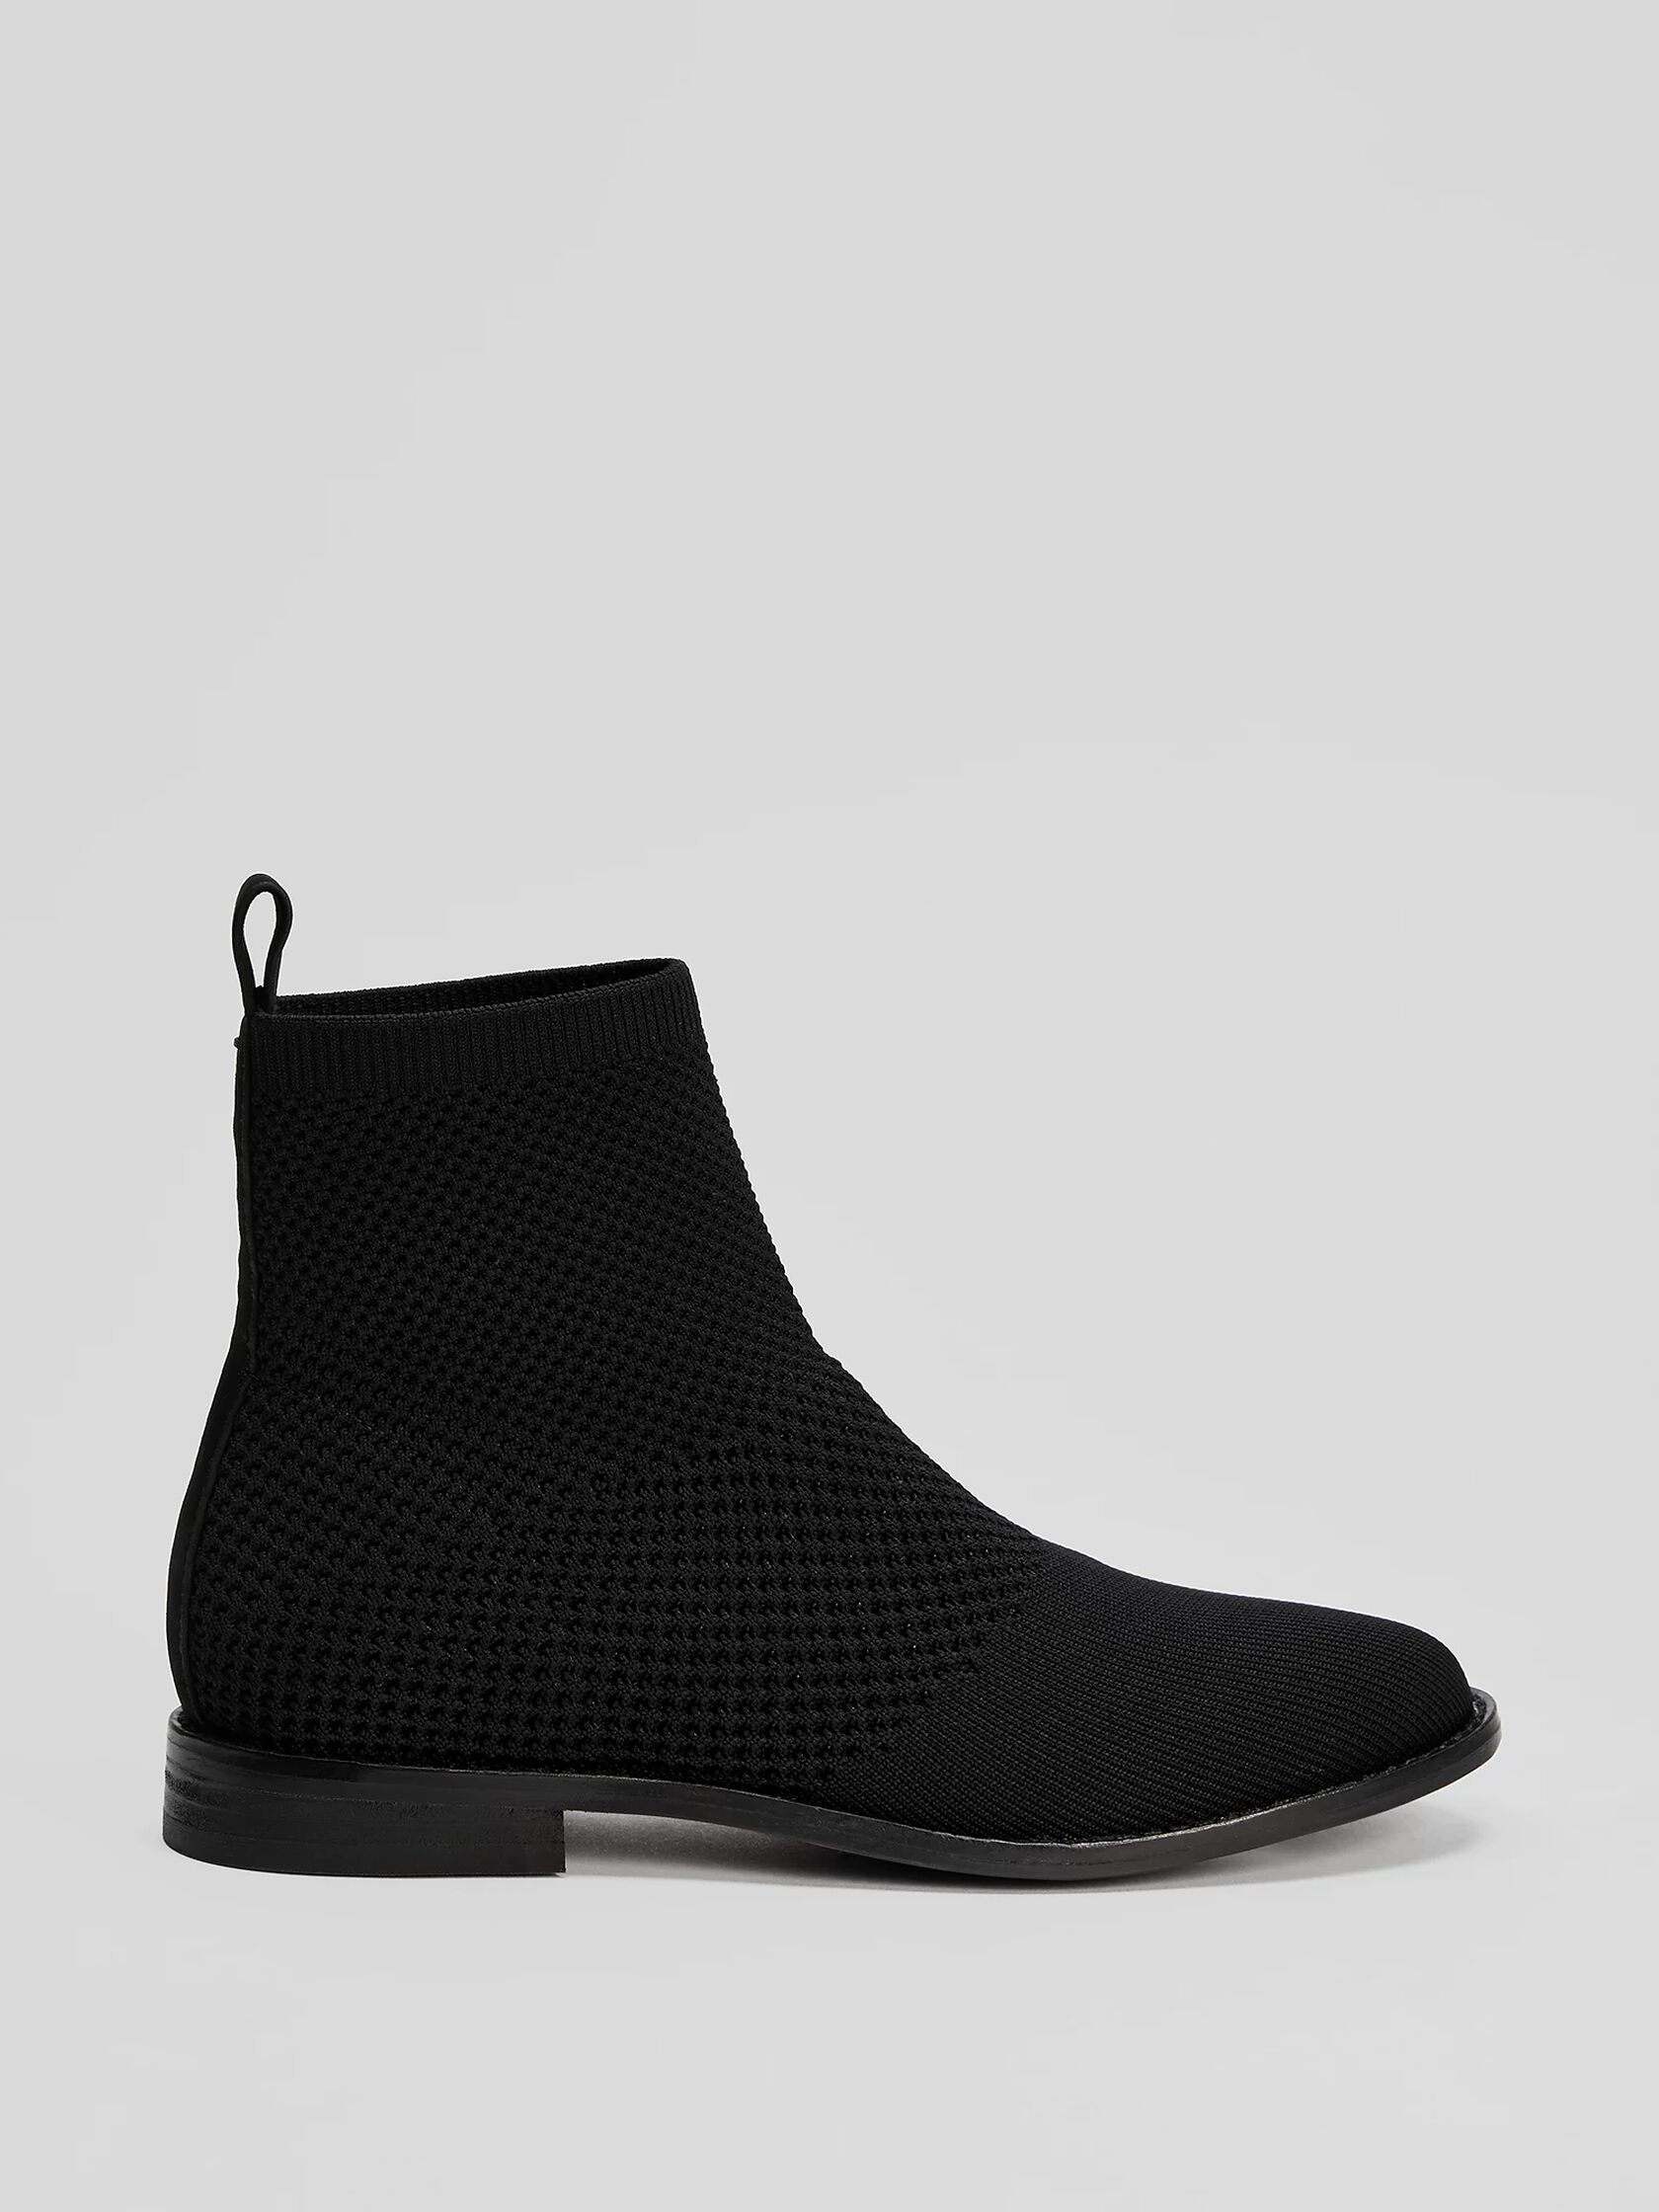 Jude Recycled Stretch Knit Bootie